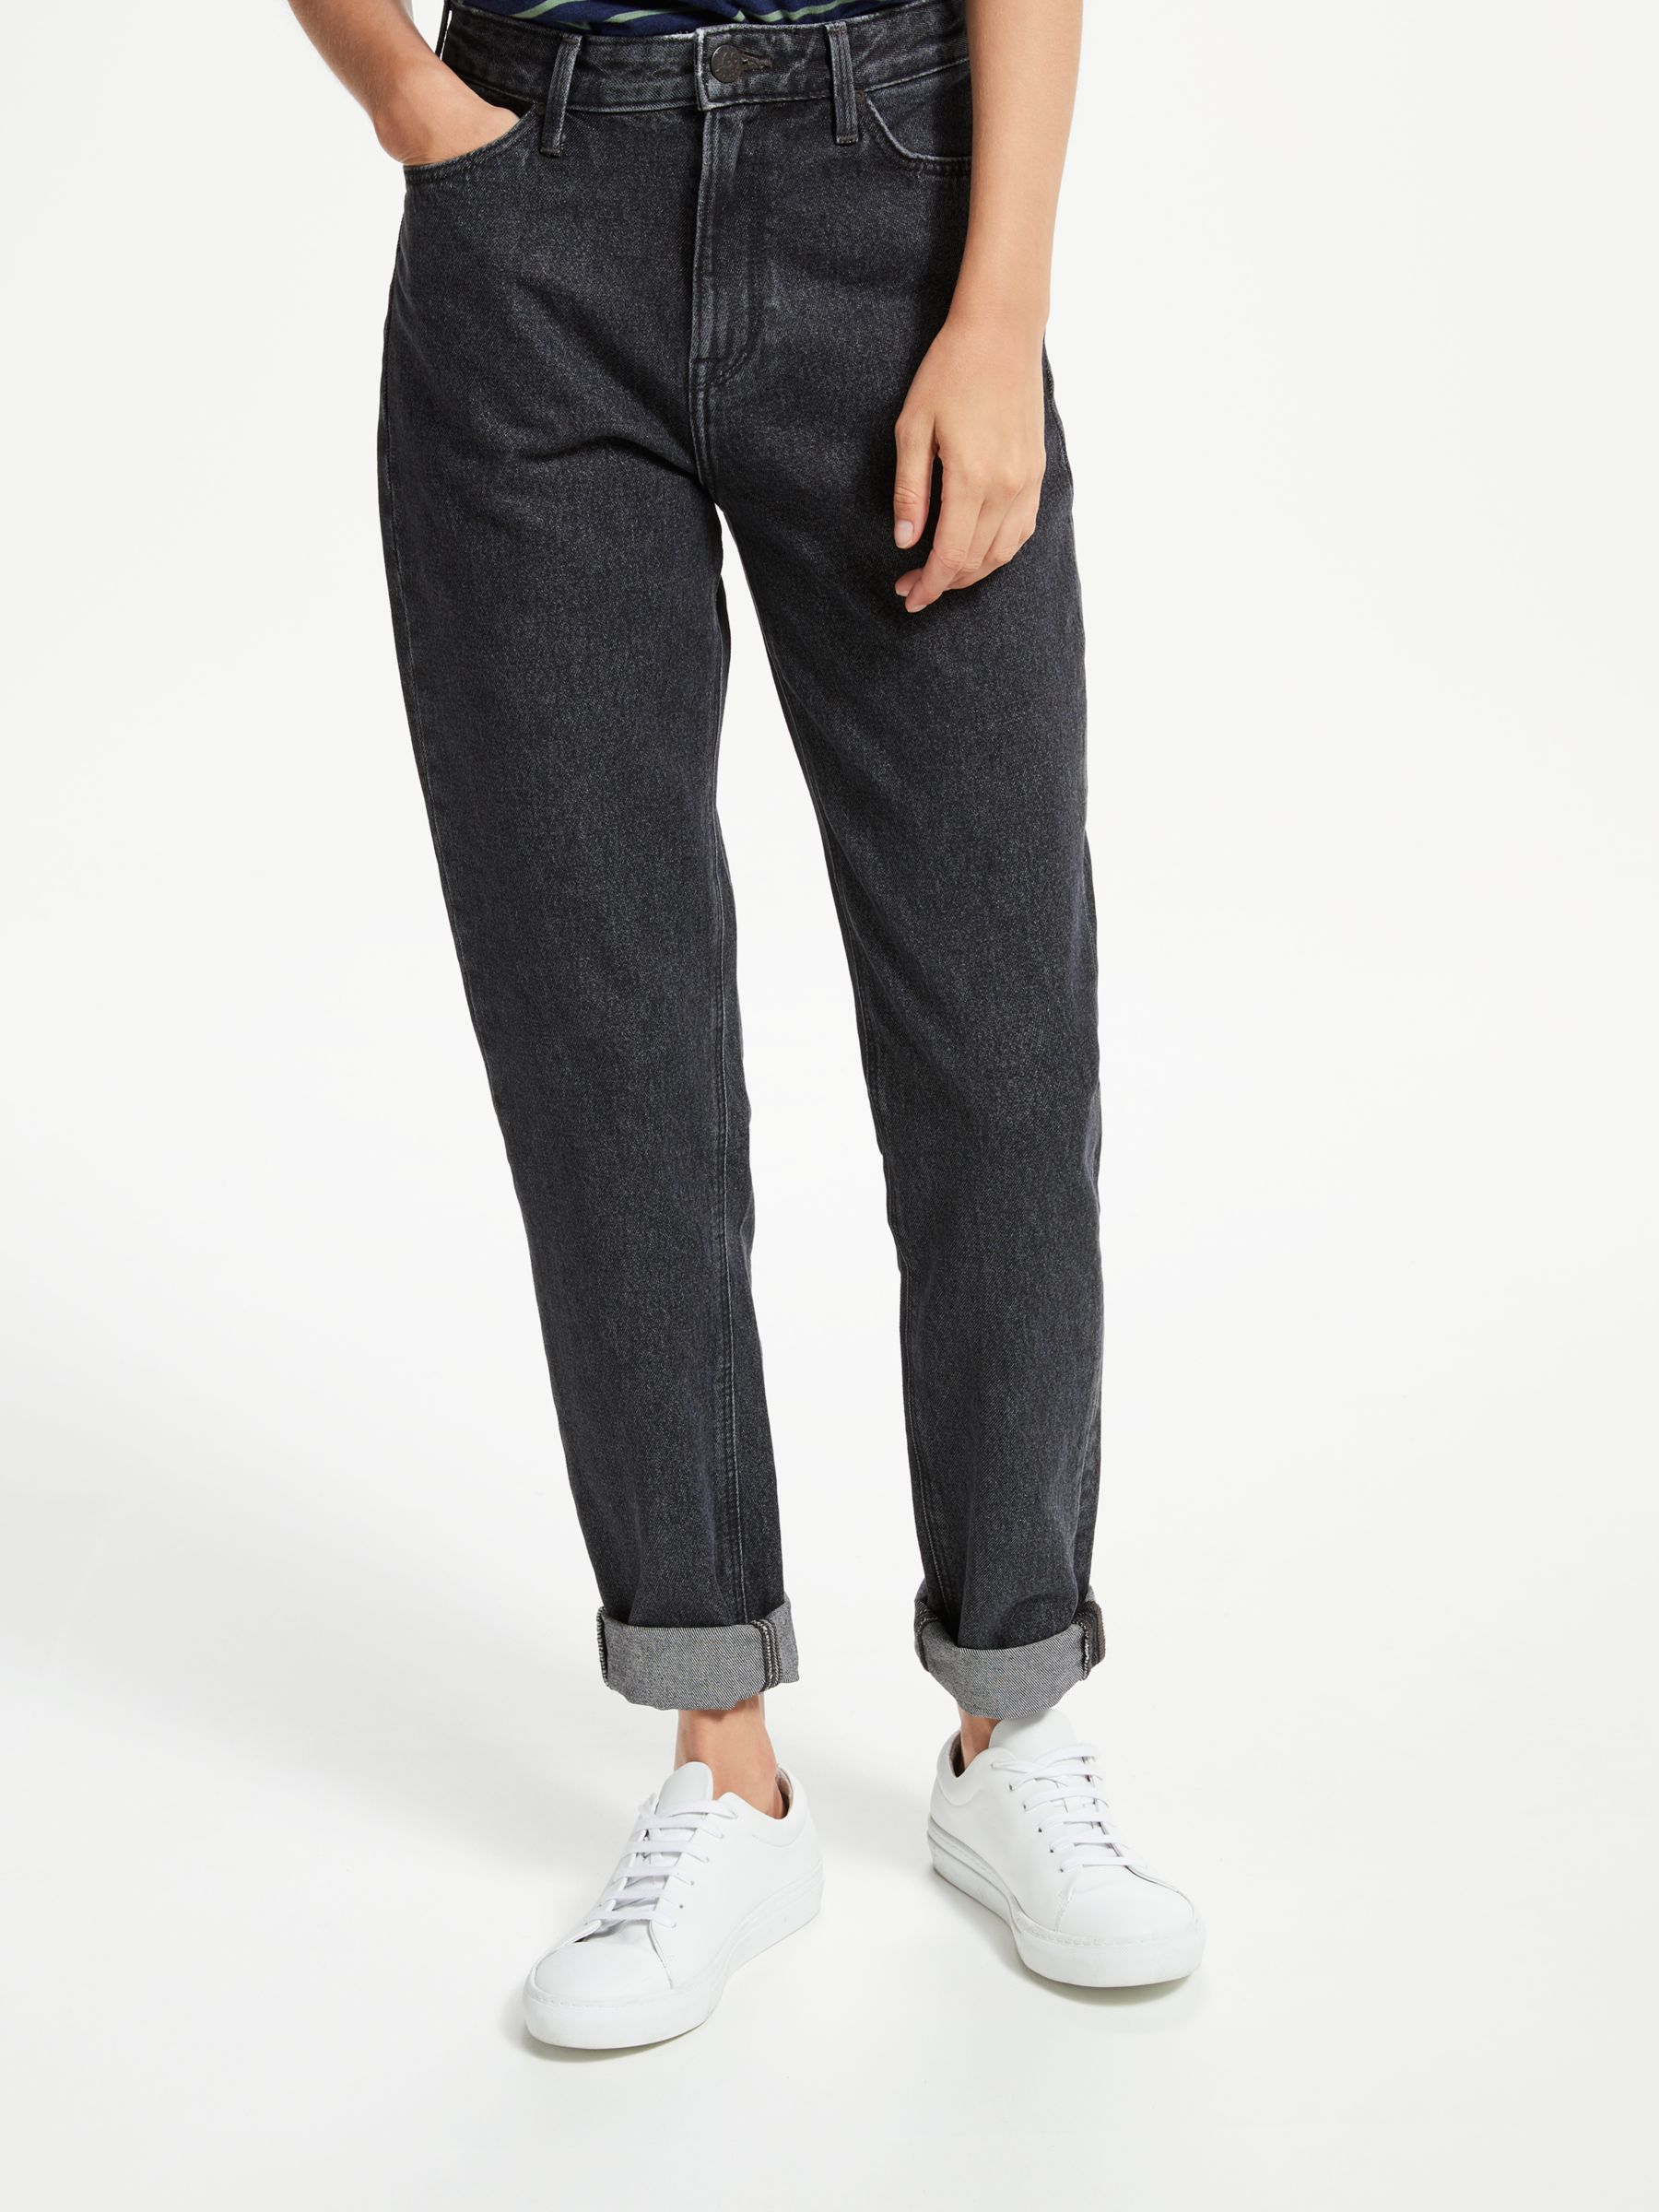 lee 1889 relaxed fit jeans